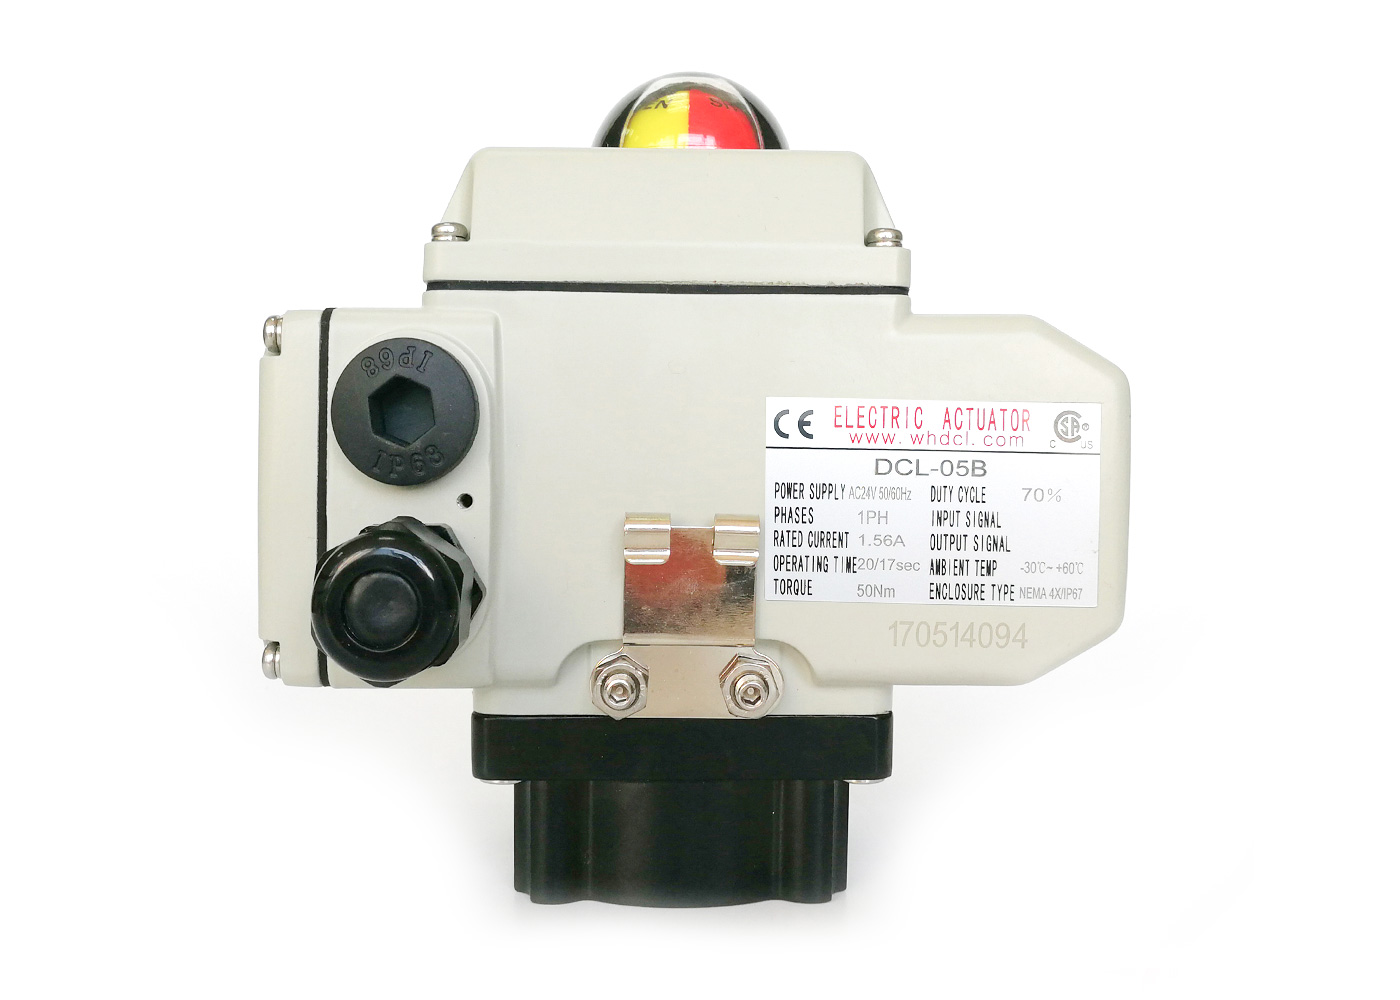 DCL-05 Electric actuator